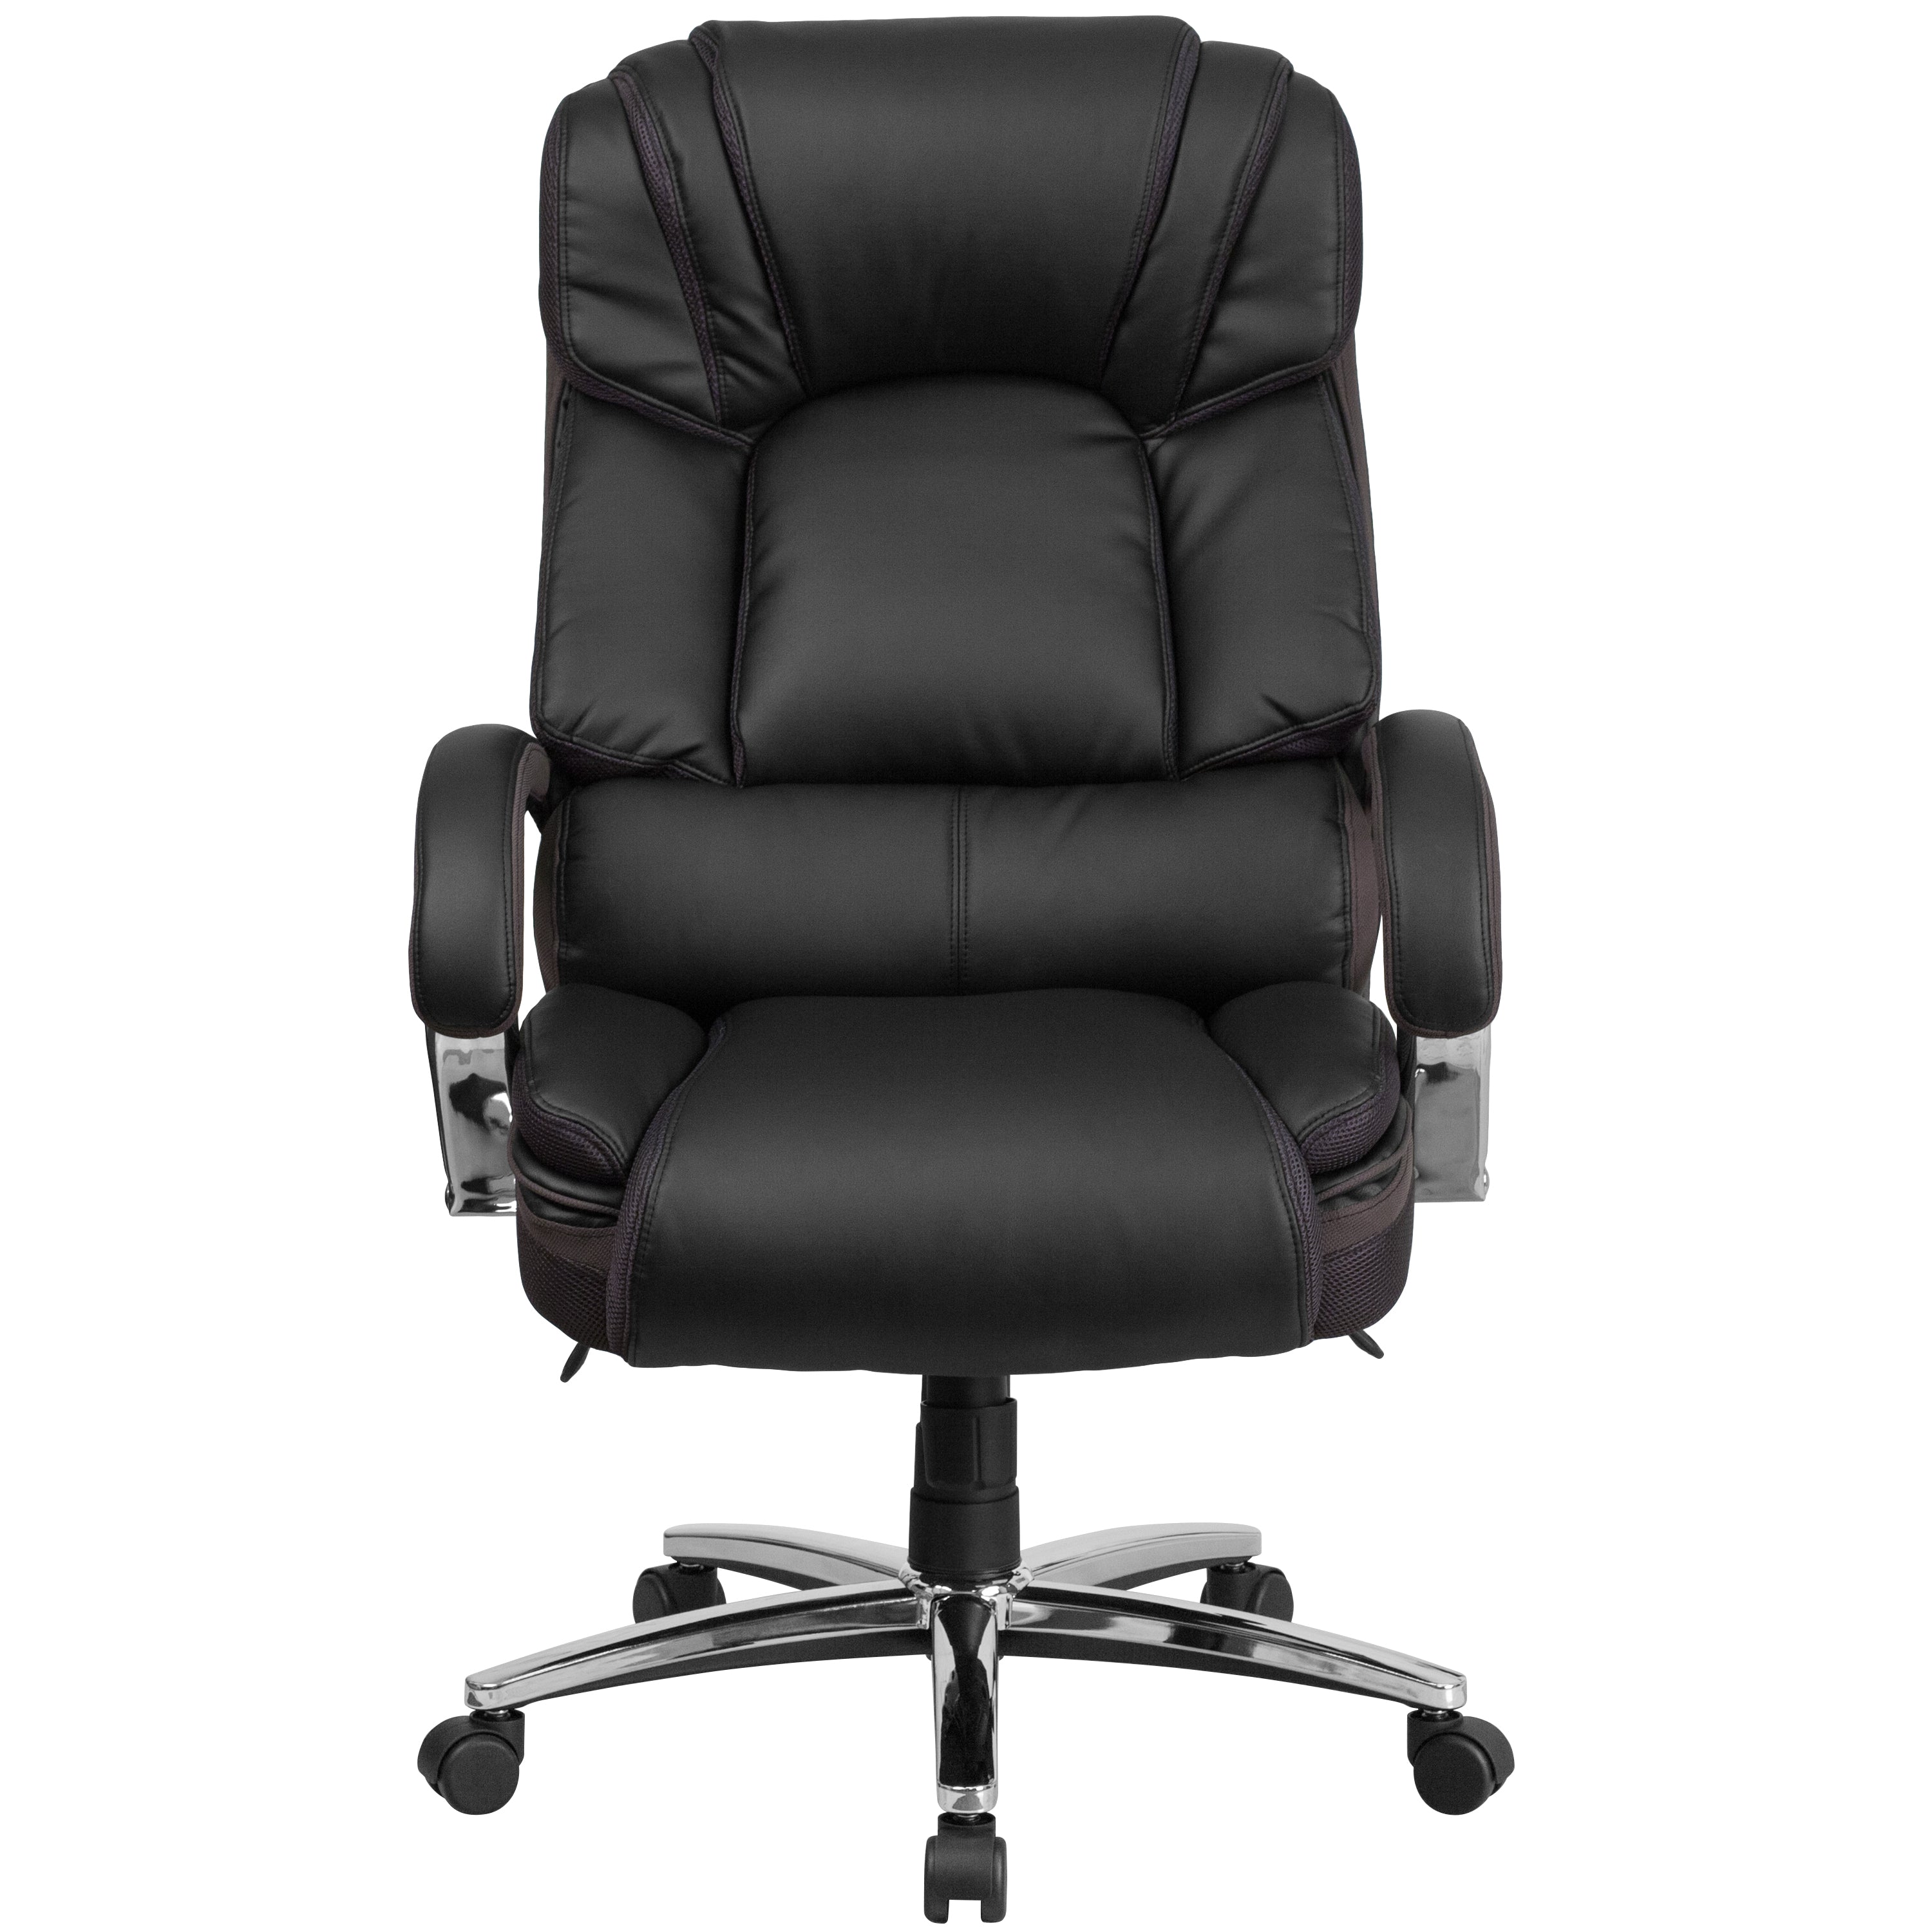 HERCULES Series Big & Tall 500 lb. Rated LeatherSoft Executive Swivel Ergonomic Office Chair with Chrome Base and Arms-Big & Tall Office Chair-Flash Furniture-Wall2Wall Furnishings